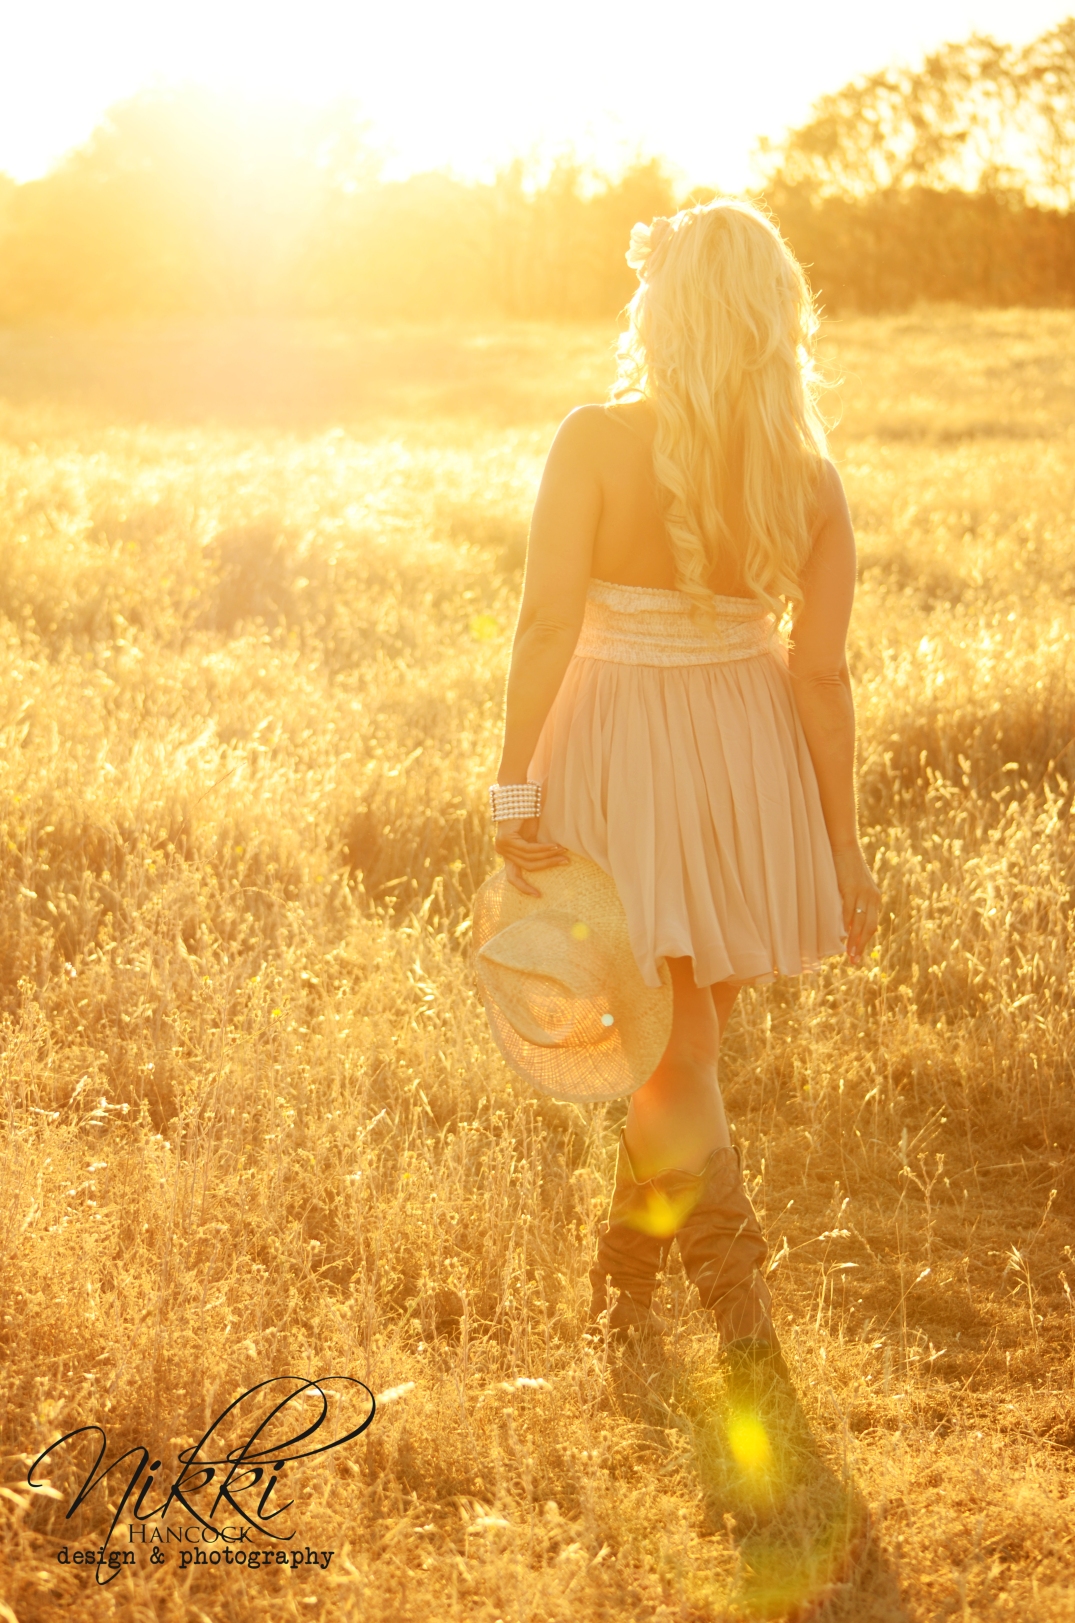 Golden hour shooting perfect hour magic hour bright sun big open golden field country girl photos photography pictures